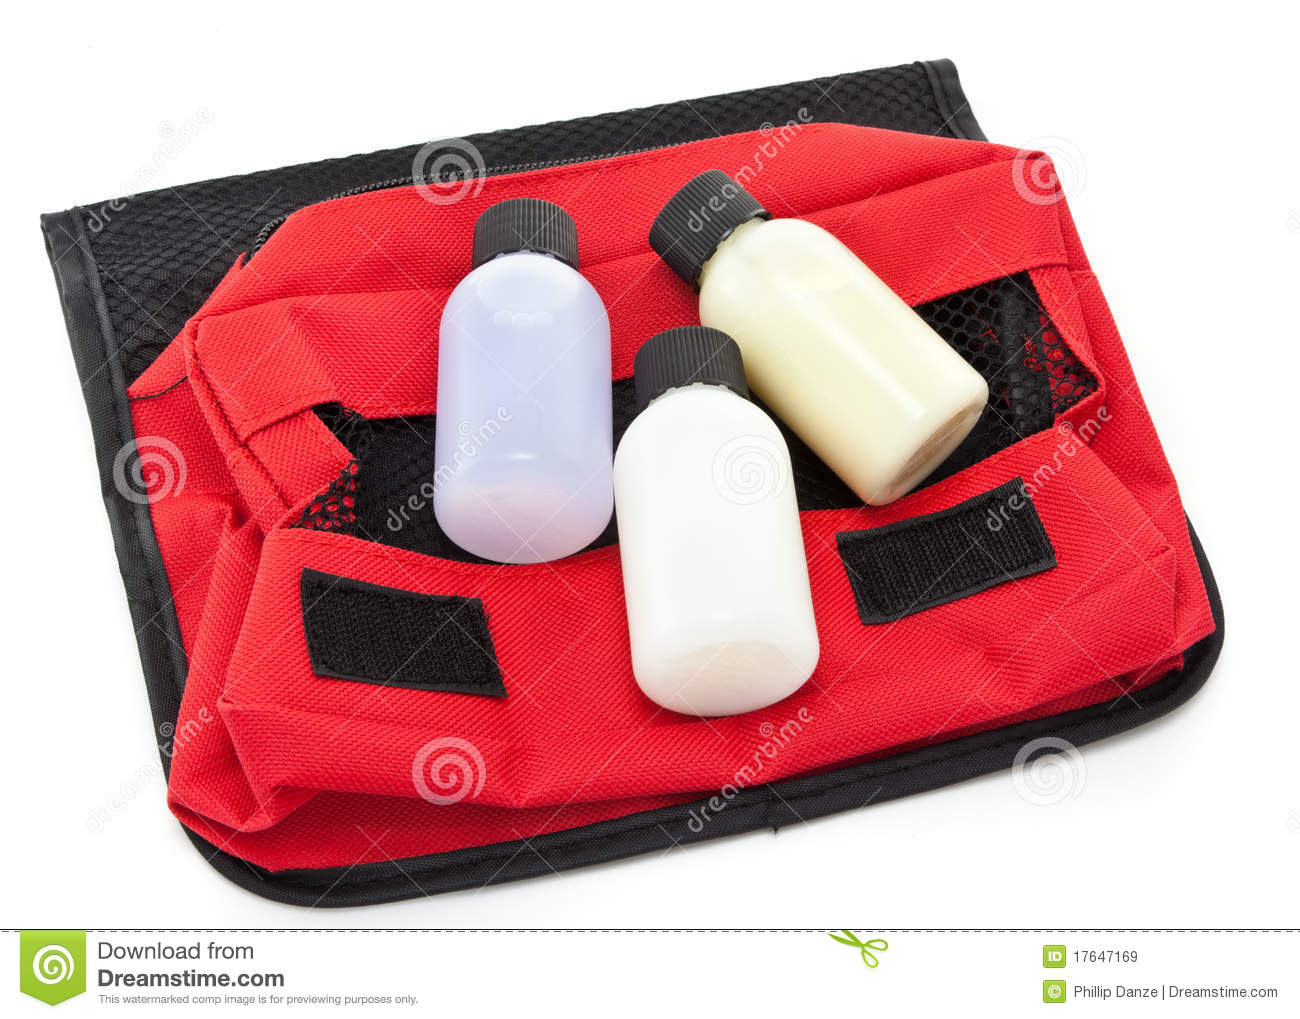 Three Travel Sized Toiletry Items On A Red Toiletries Bag